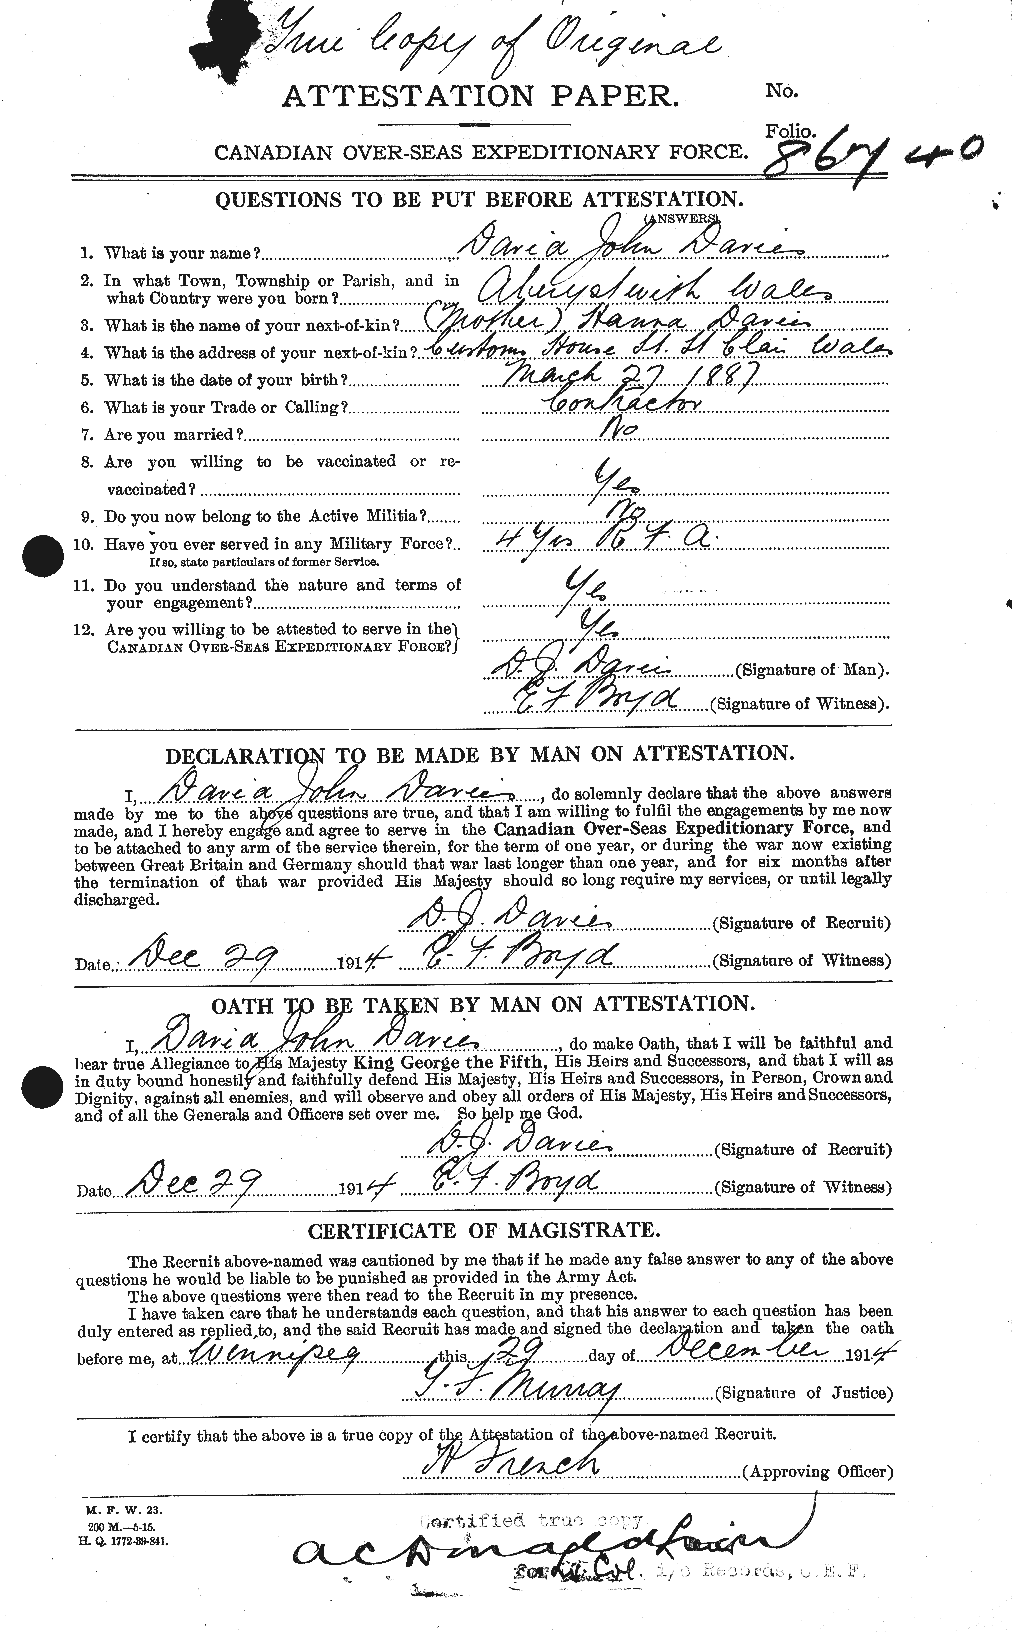 Personnel Records of the First World War - CEF 278970a